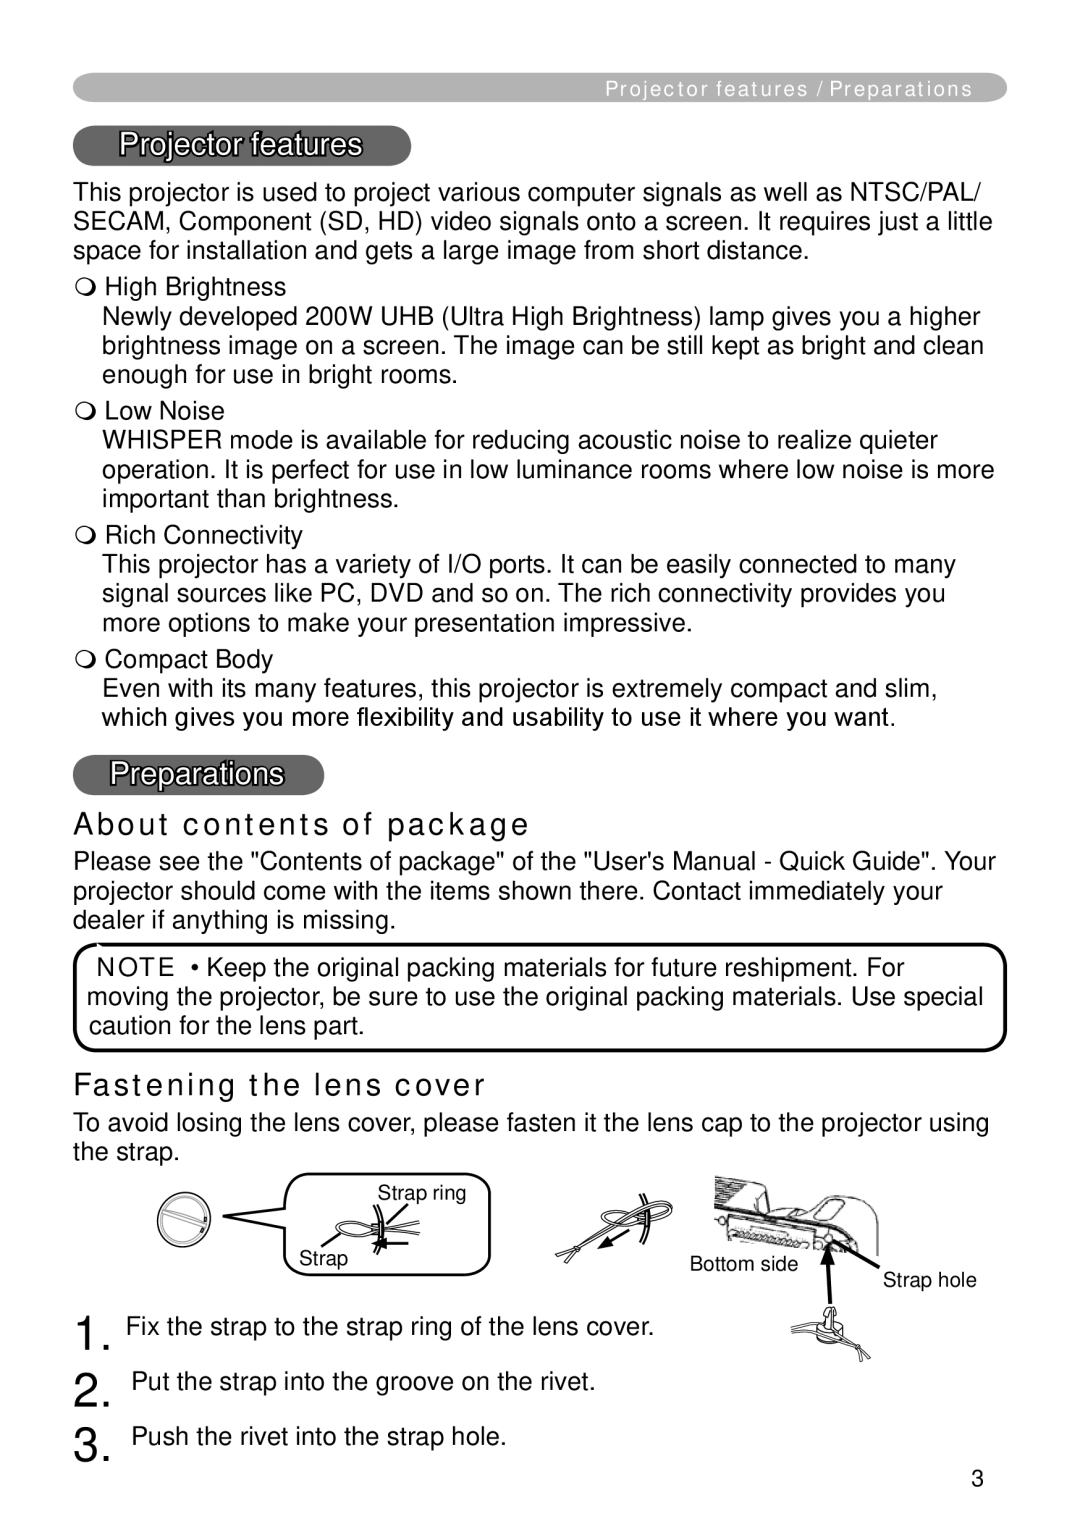 Hitachi CP-X265 user manual Projector features, Preparations, About contents of package, Fastening the lens cover 